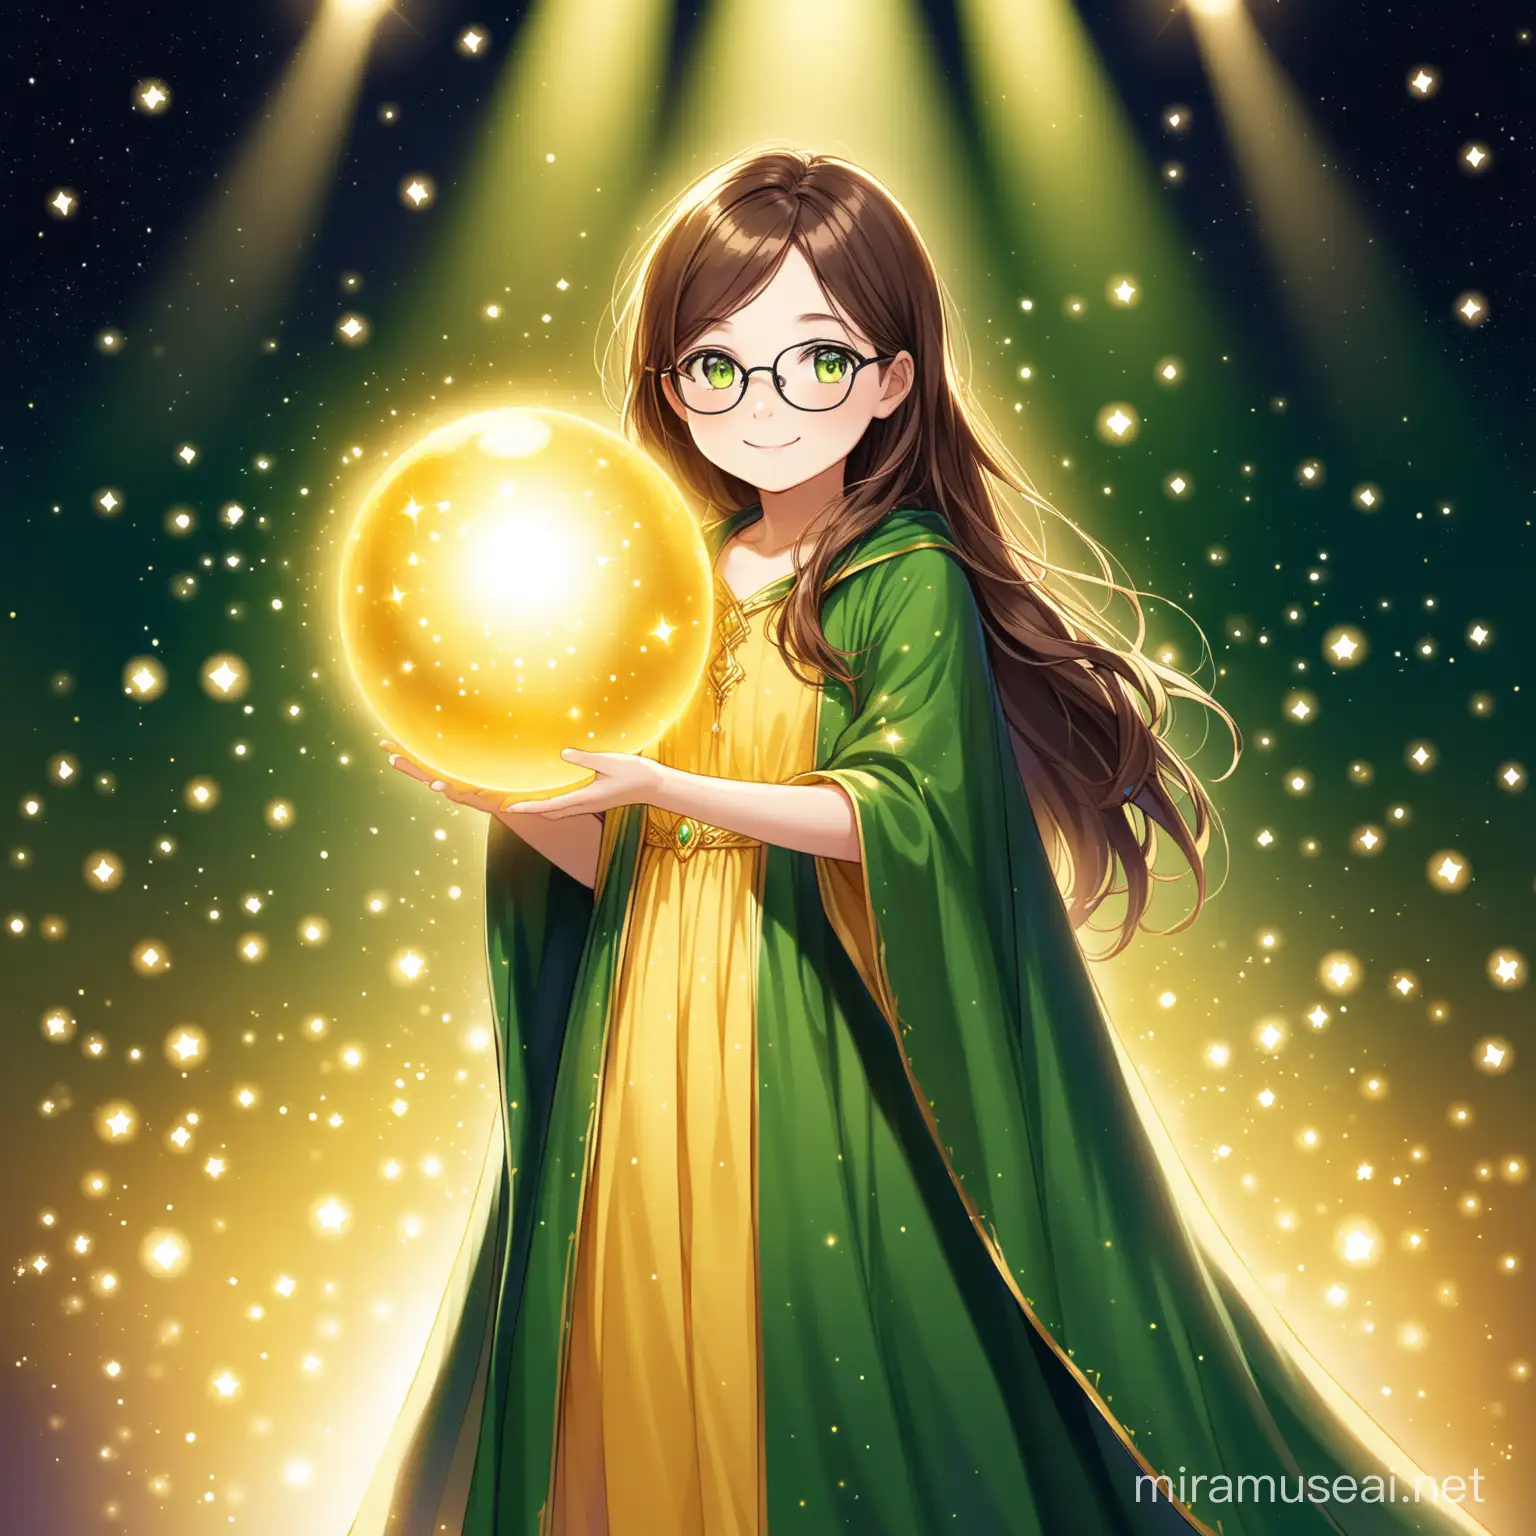 11 year old girl, long flowy brown hair, green eyes, black glasses, long yellow pretty dress, dark green mystical cloak, holding a golden glowing ball, smiling, on stage,